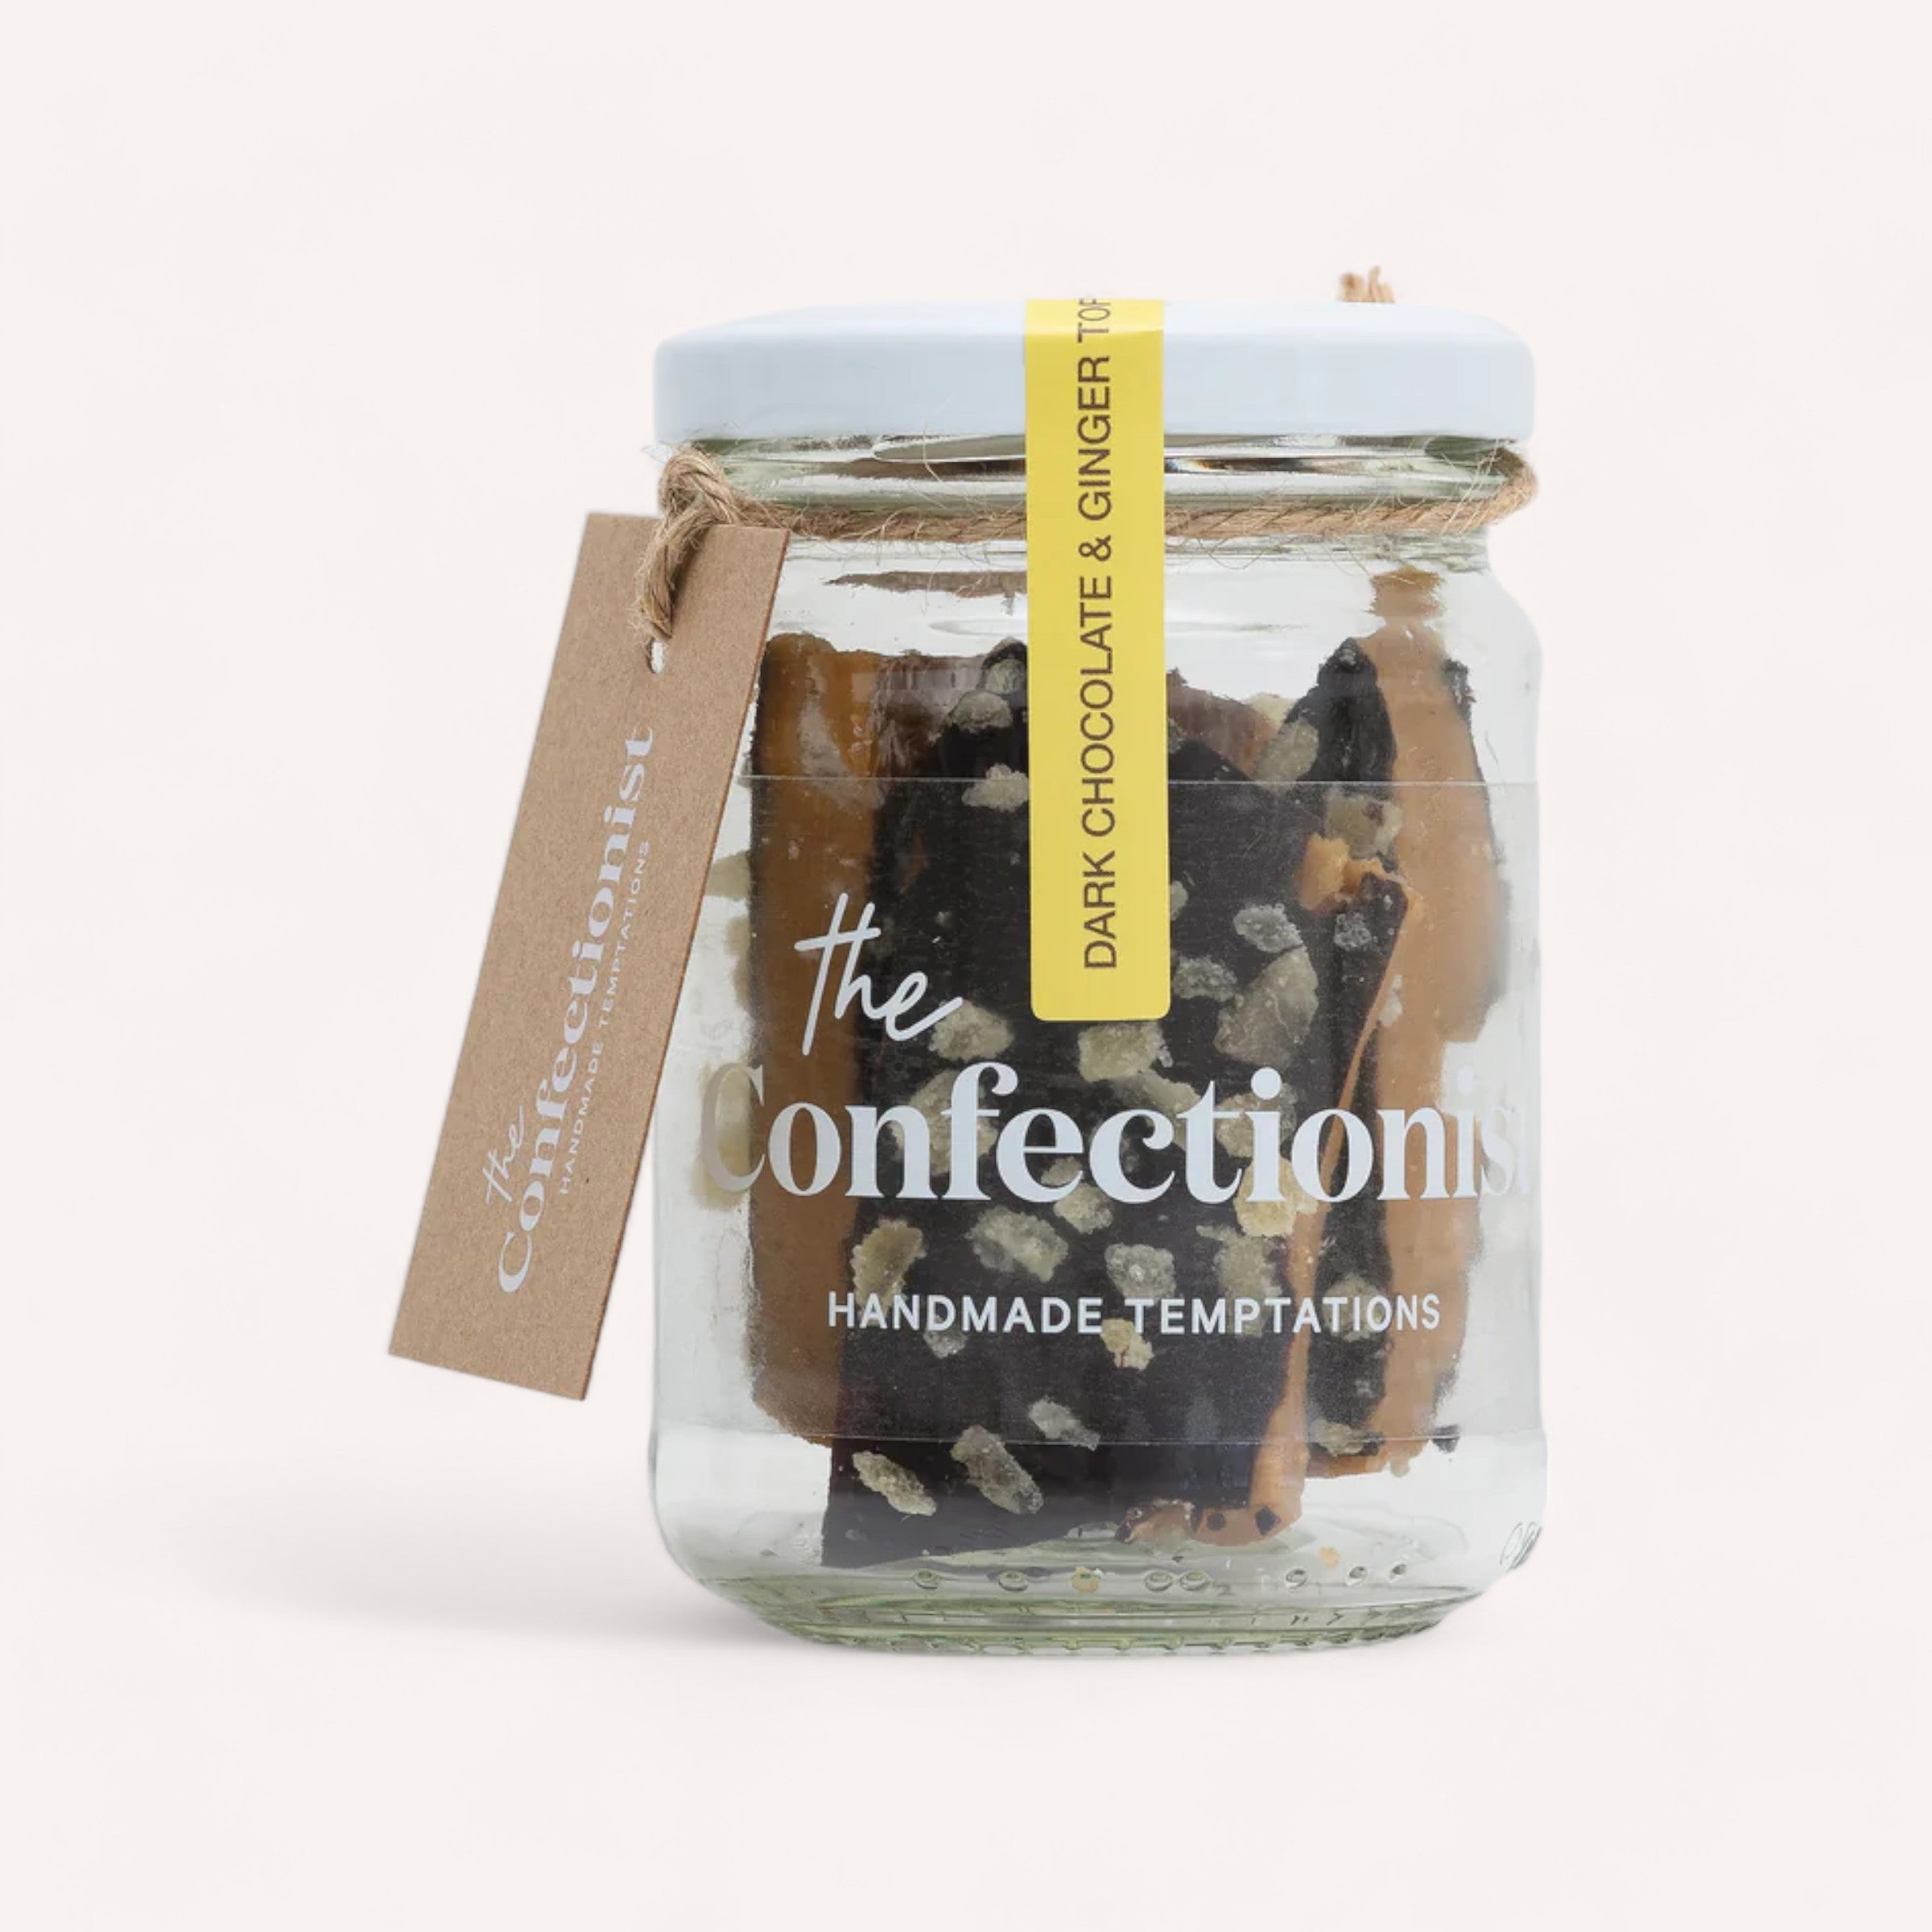 A glass jar filled with Ginger Dark Chocolate Toffee by The Confectionist, labeled "the confections - handmade temptations," sealed with a yellow band and a brown tag reading "chocfections.